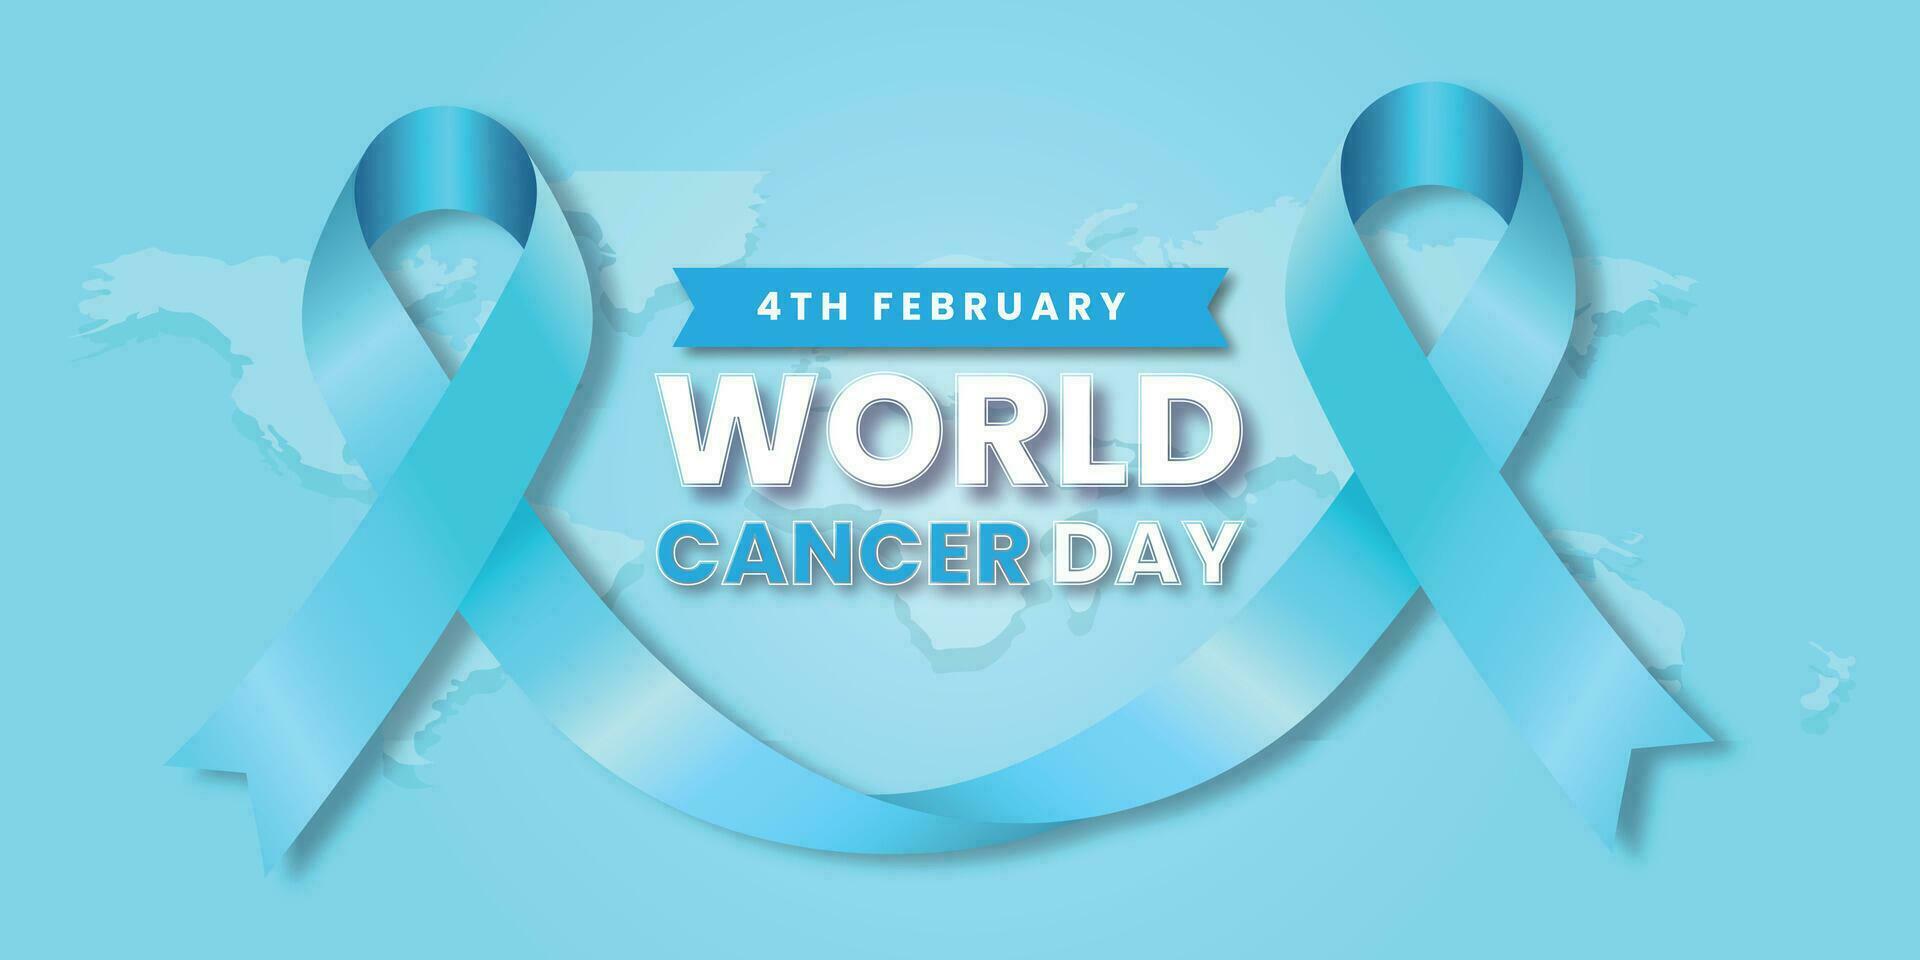 World Cancer Day. Calligraphy Poster Design. Realistic Blue Ribbon. February 4 th is Cancer Awareness Day. Vector Illustration